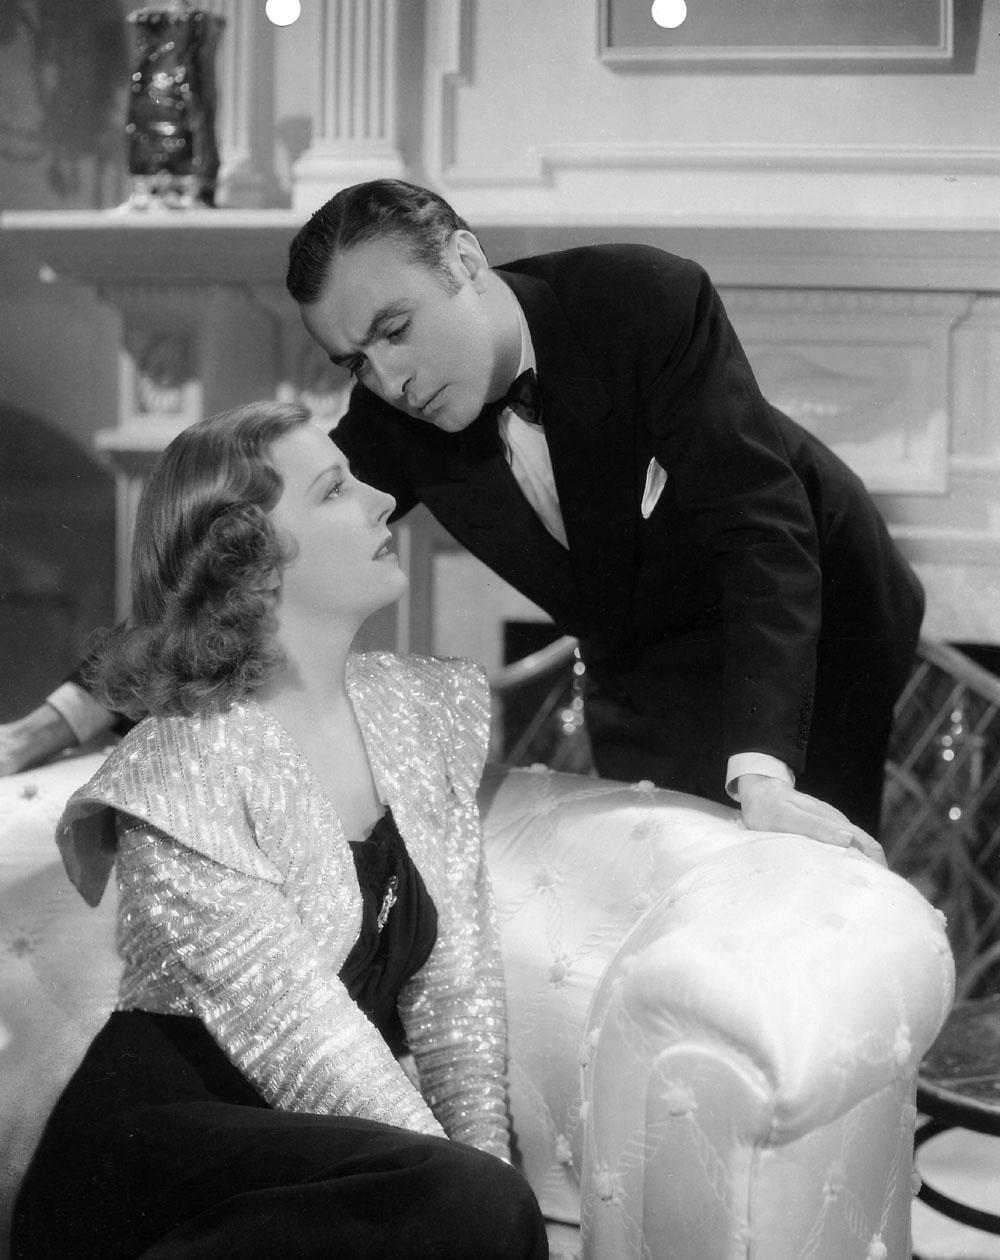 Charles Boyer and Irene Dunne in "Love Affair" in 1939. (Public Domain)